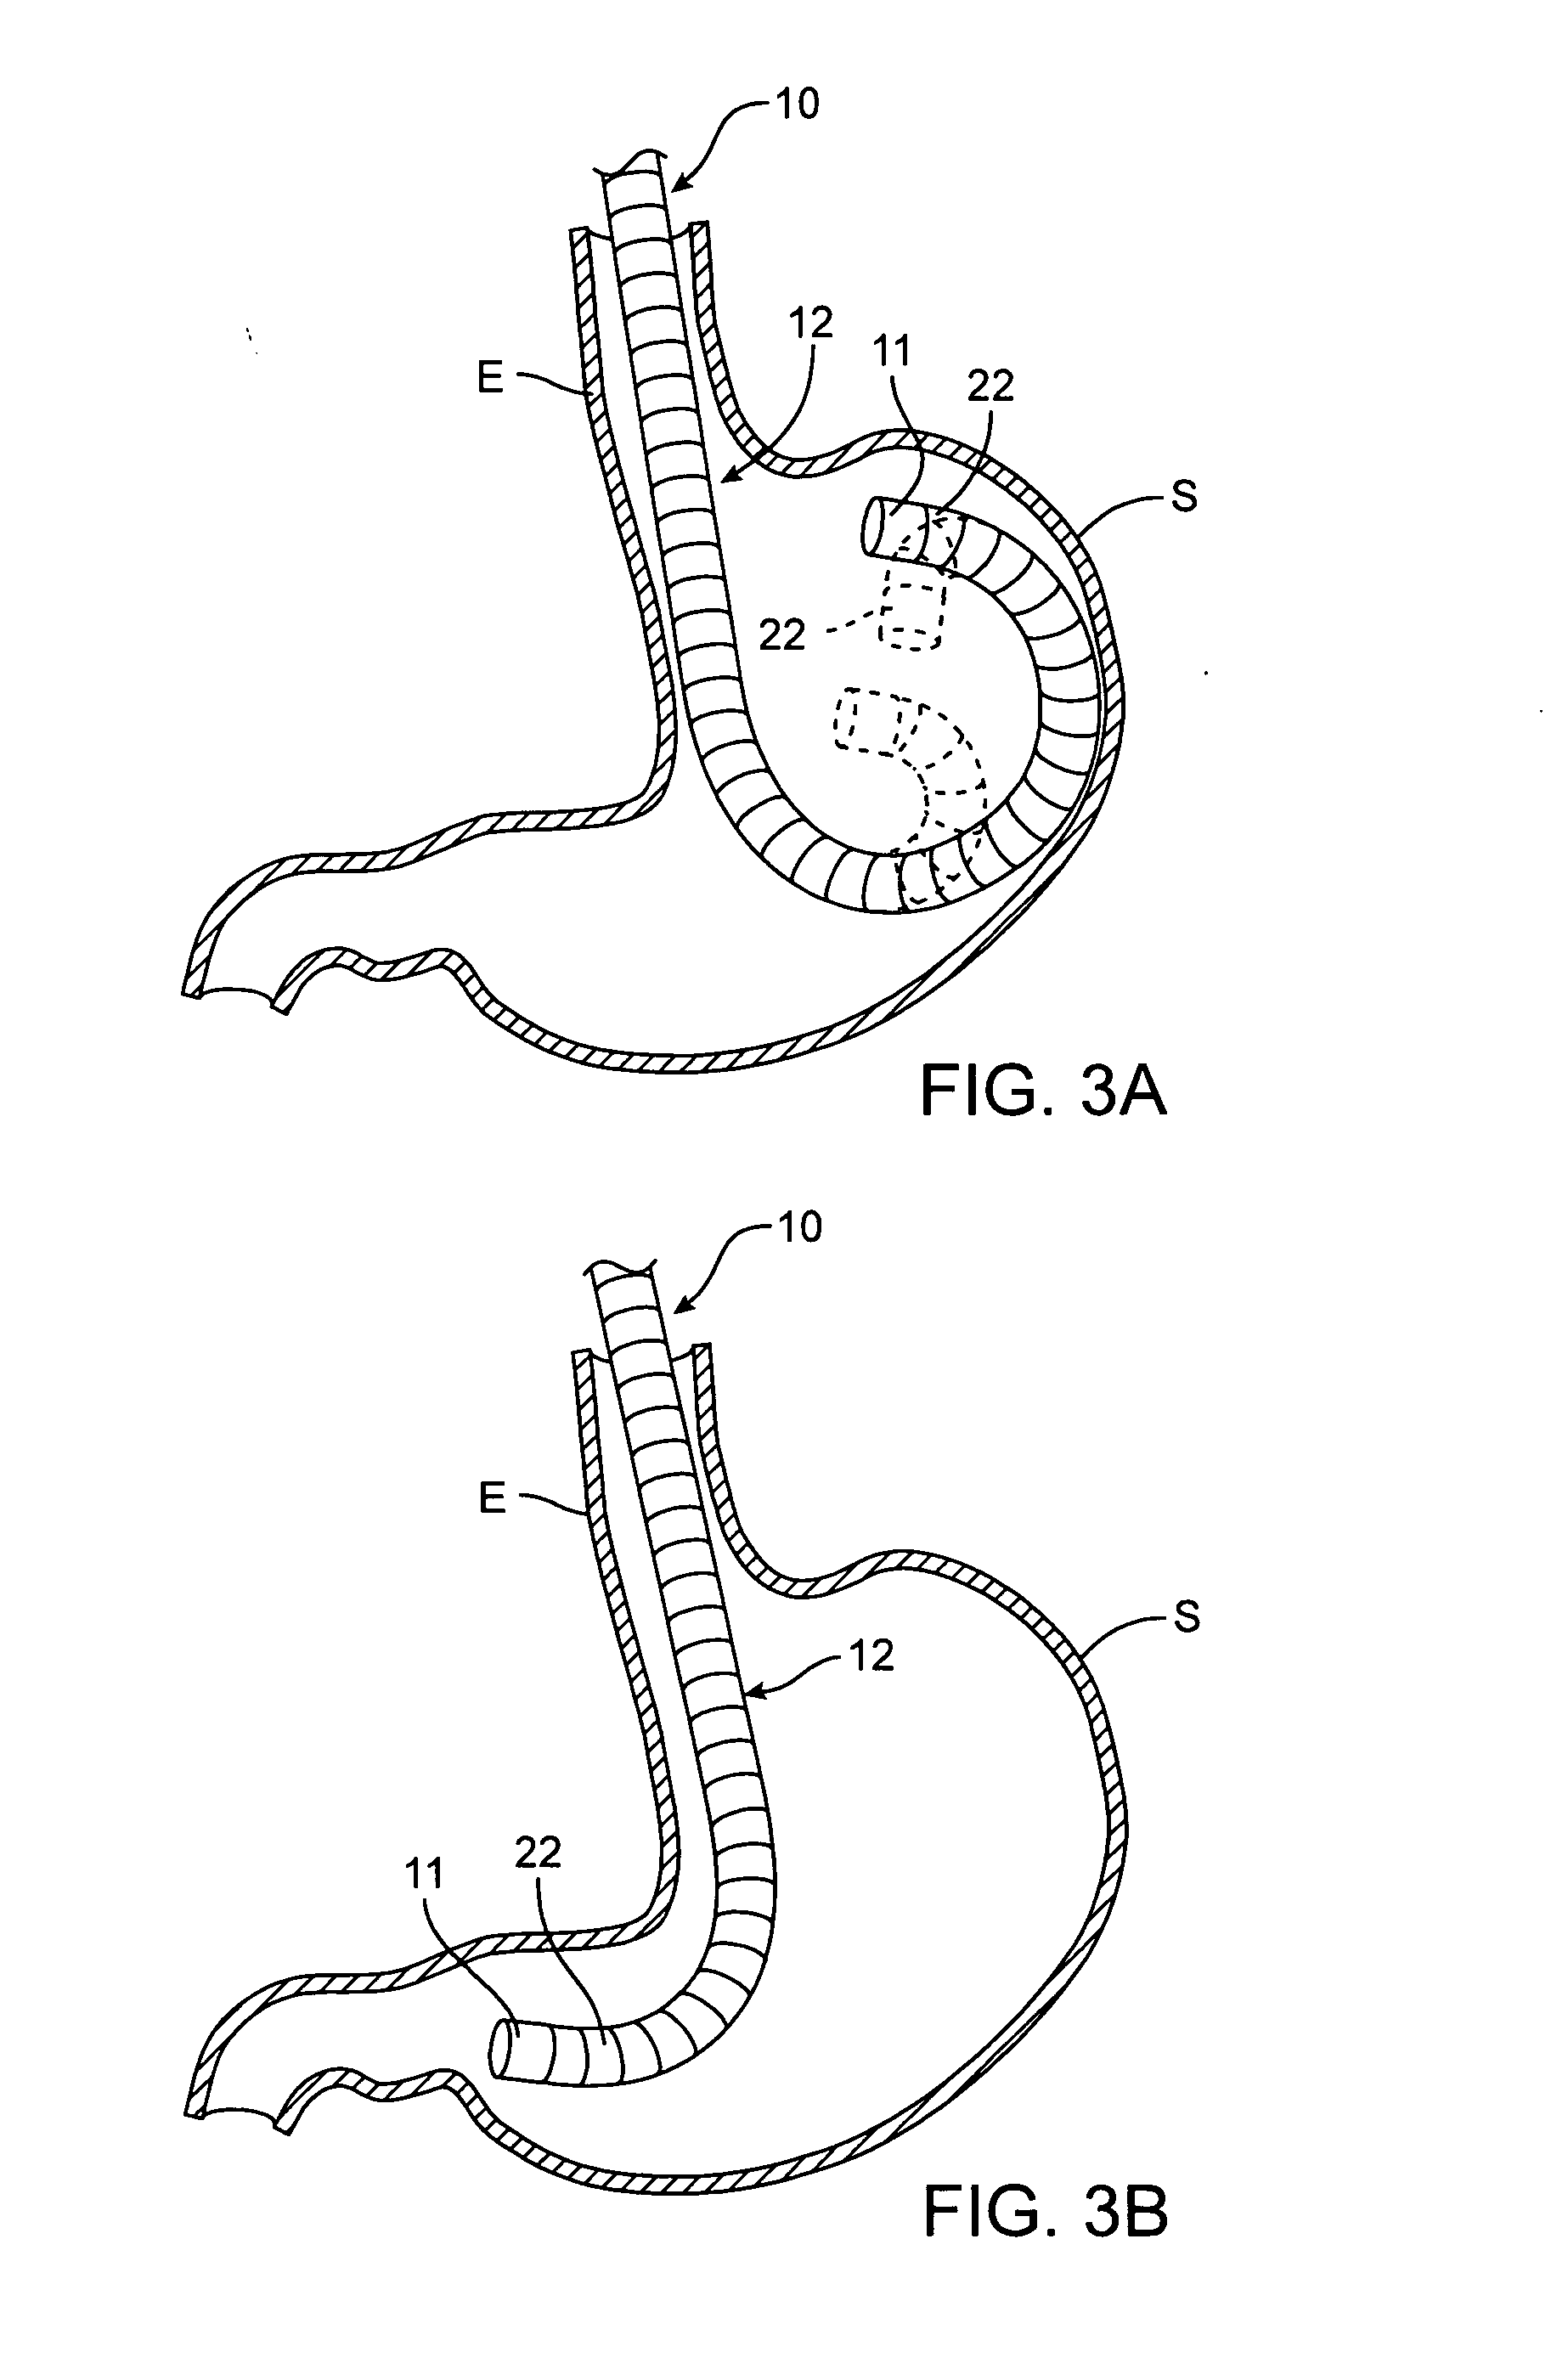 Apparatus and methods for obtaining endoluminal access with a steerable guide having a variable pivot